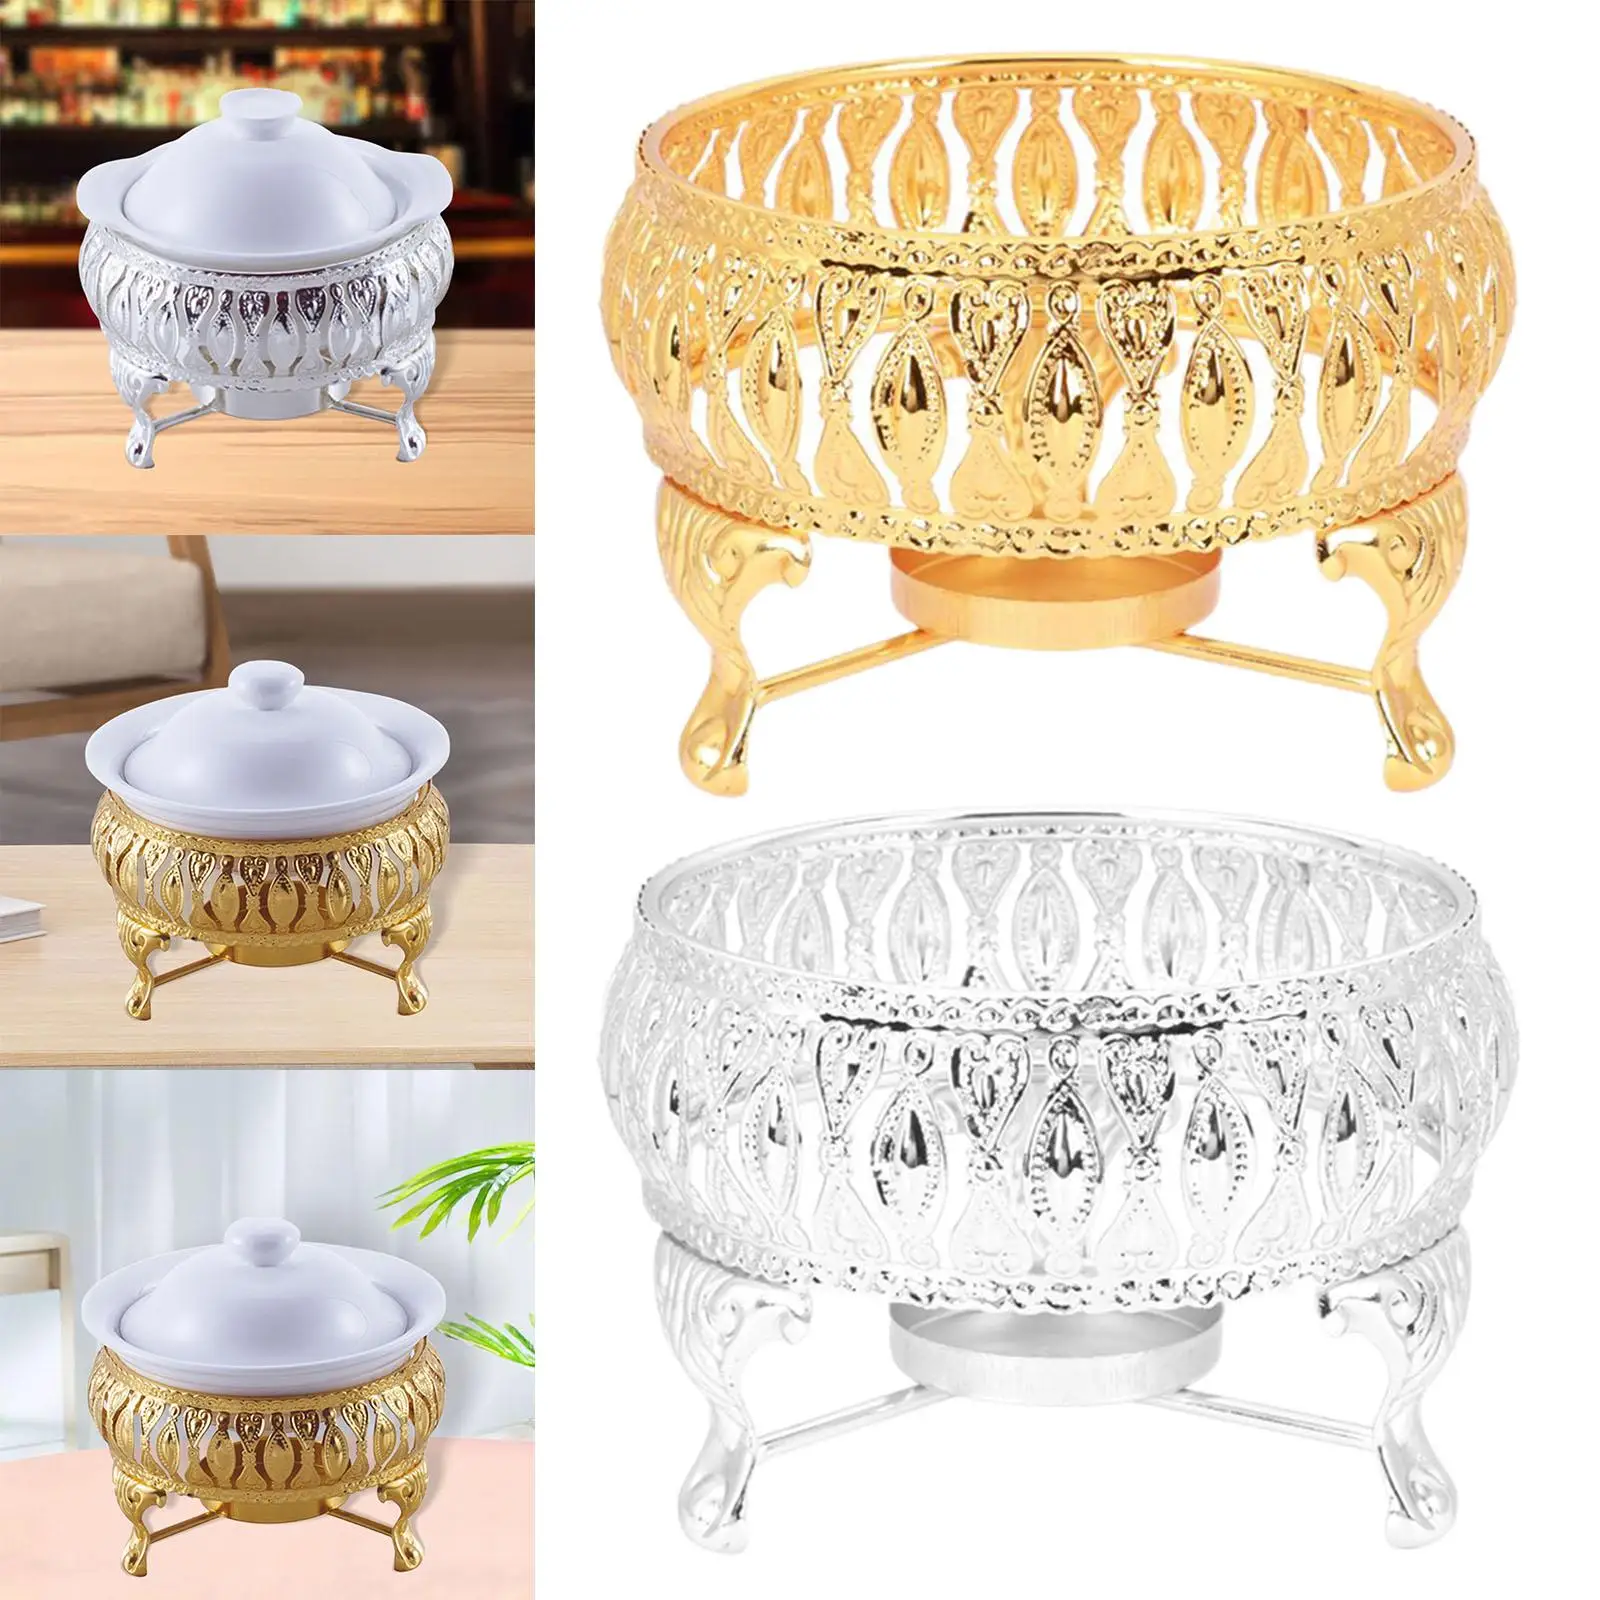 Zinc Alloy Teapot Warmer with Candle Holder Insulation Base Tealight Holder Support Teaware European Style Teapot  Warmer